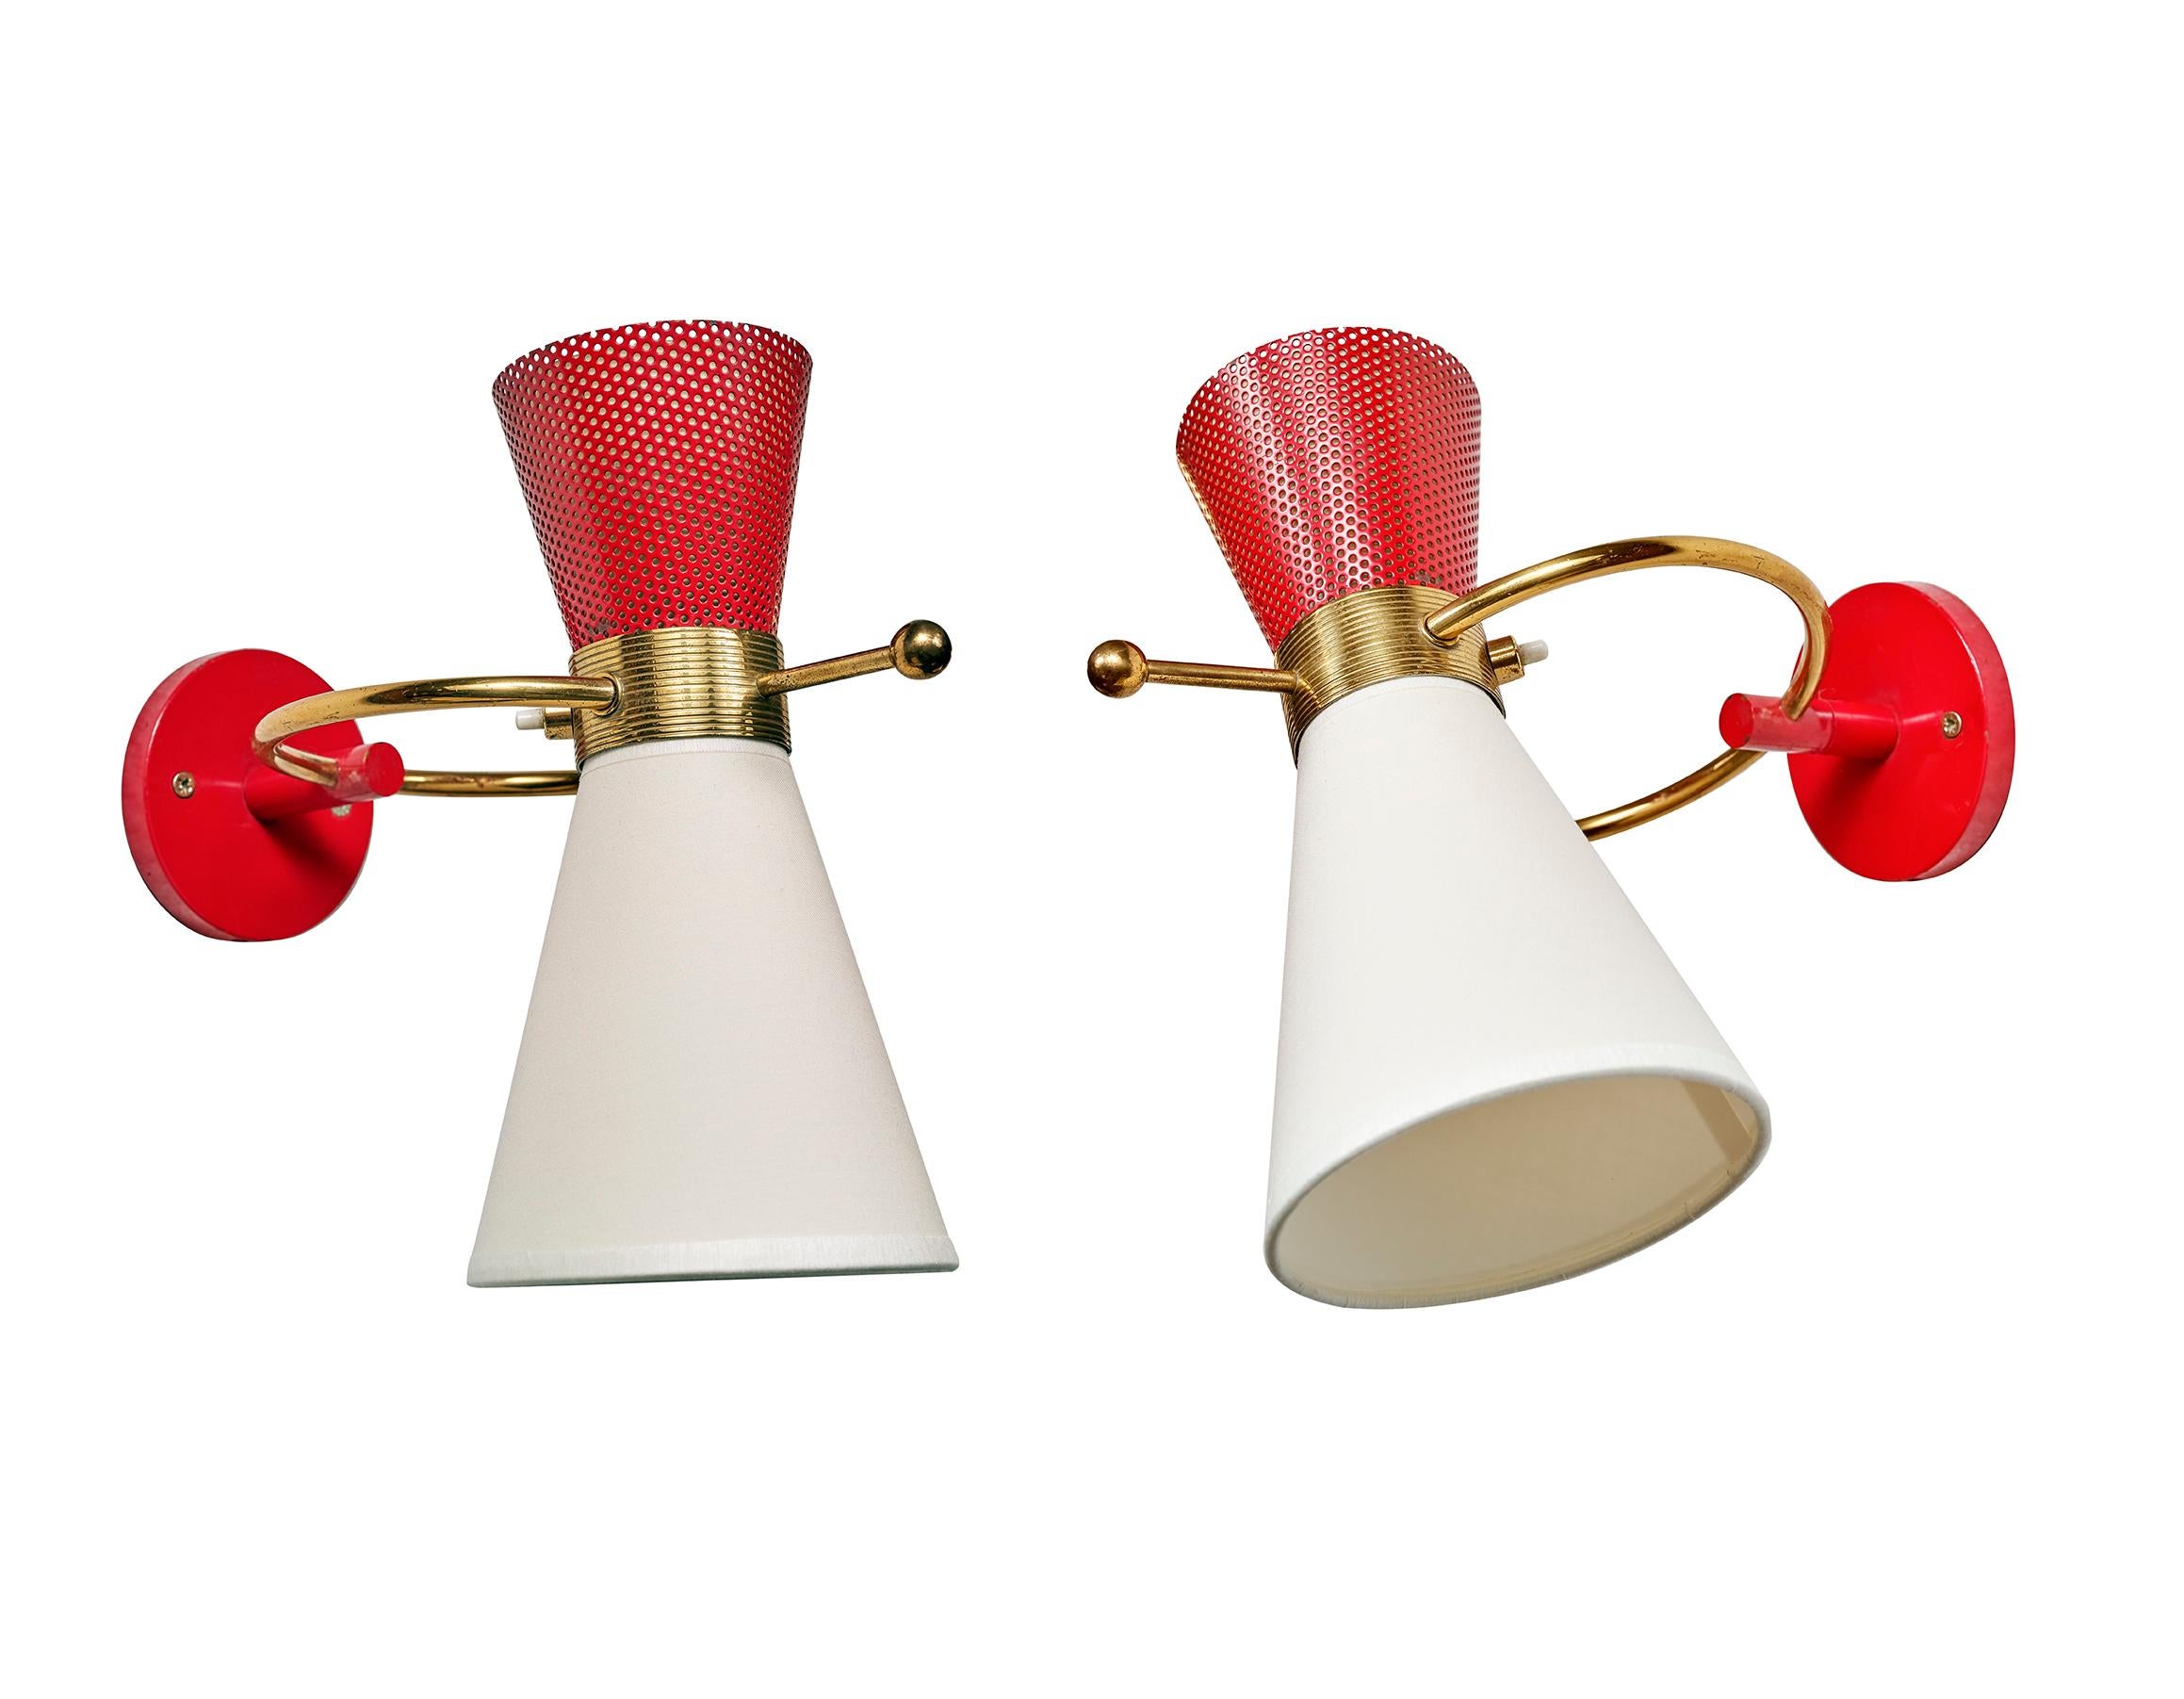 Pair of sconces adjustable by Maison Arlus from 1950
Red lacquered metal
Brass and lampshade
(2 pair available).